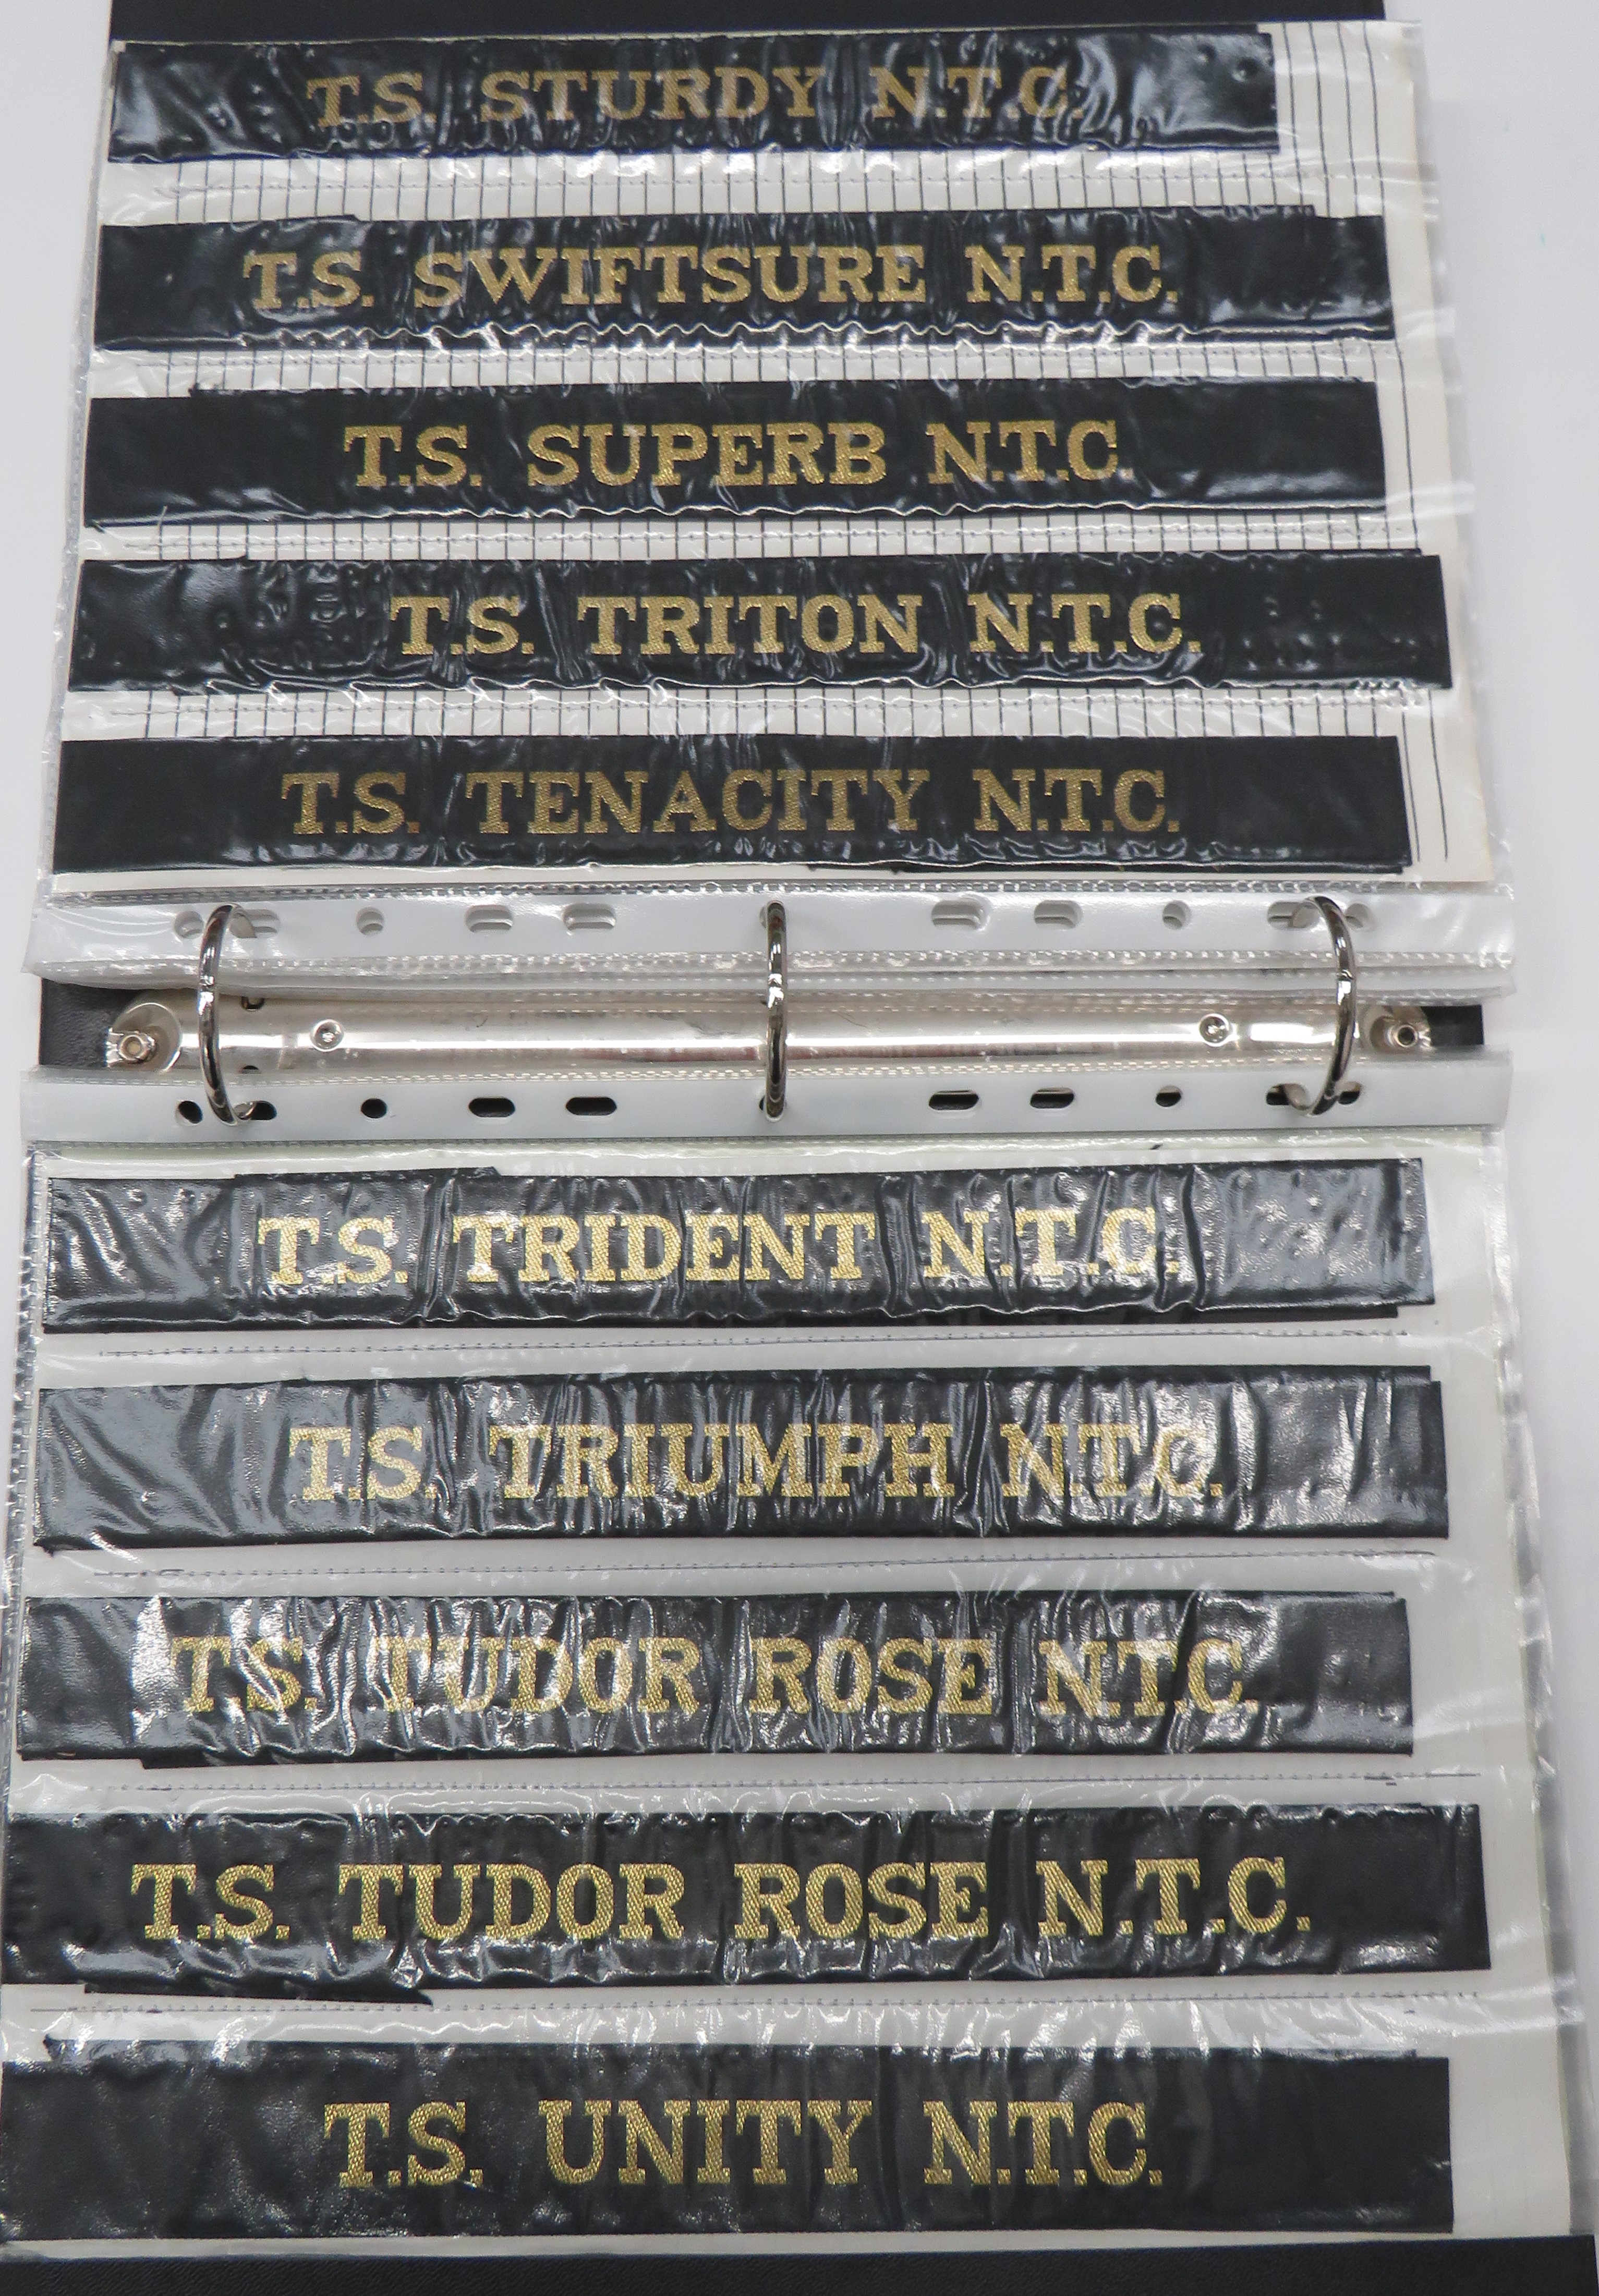 75 x Training Ship Cap Tallies including T.S. Active NTC ... T.S. Alert NTC ... T S Crusader NTC ... - Image 3 of 3